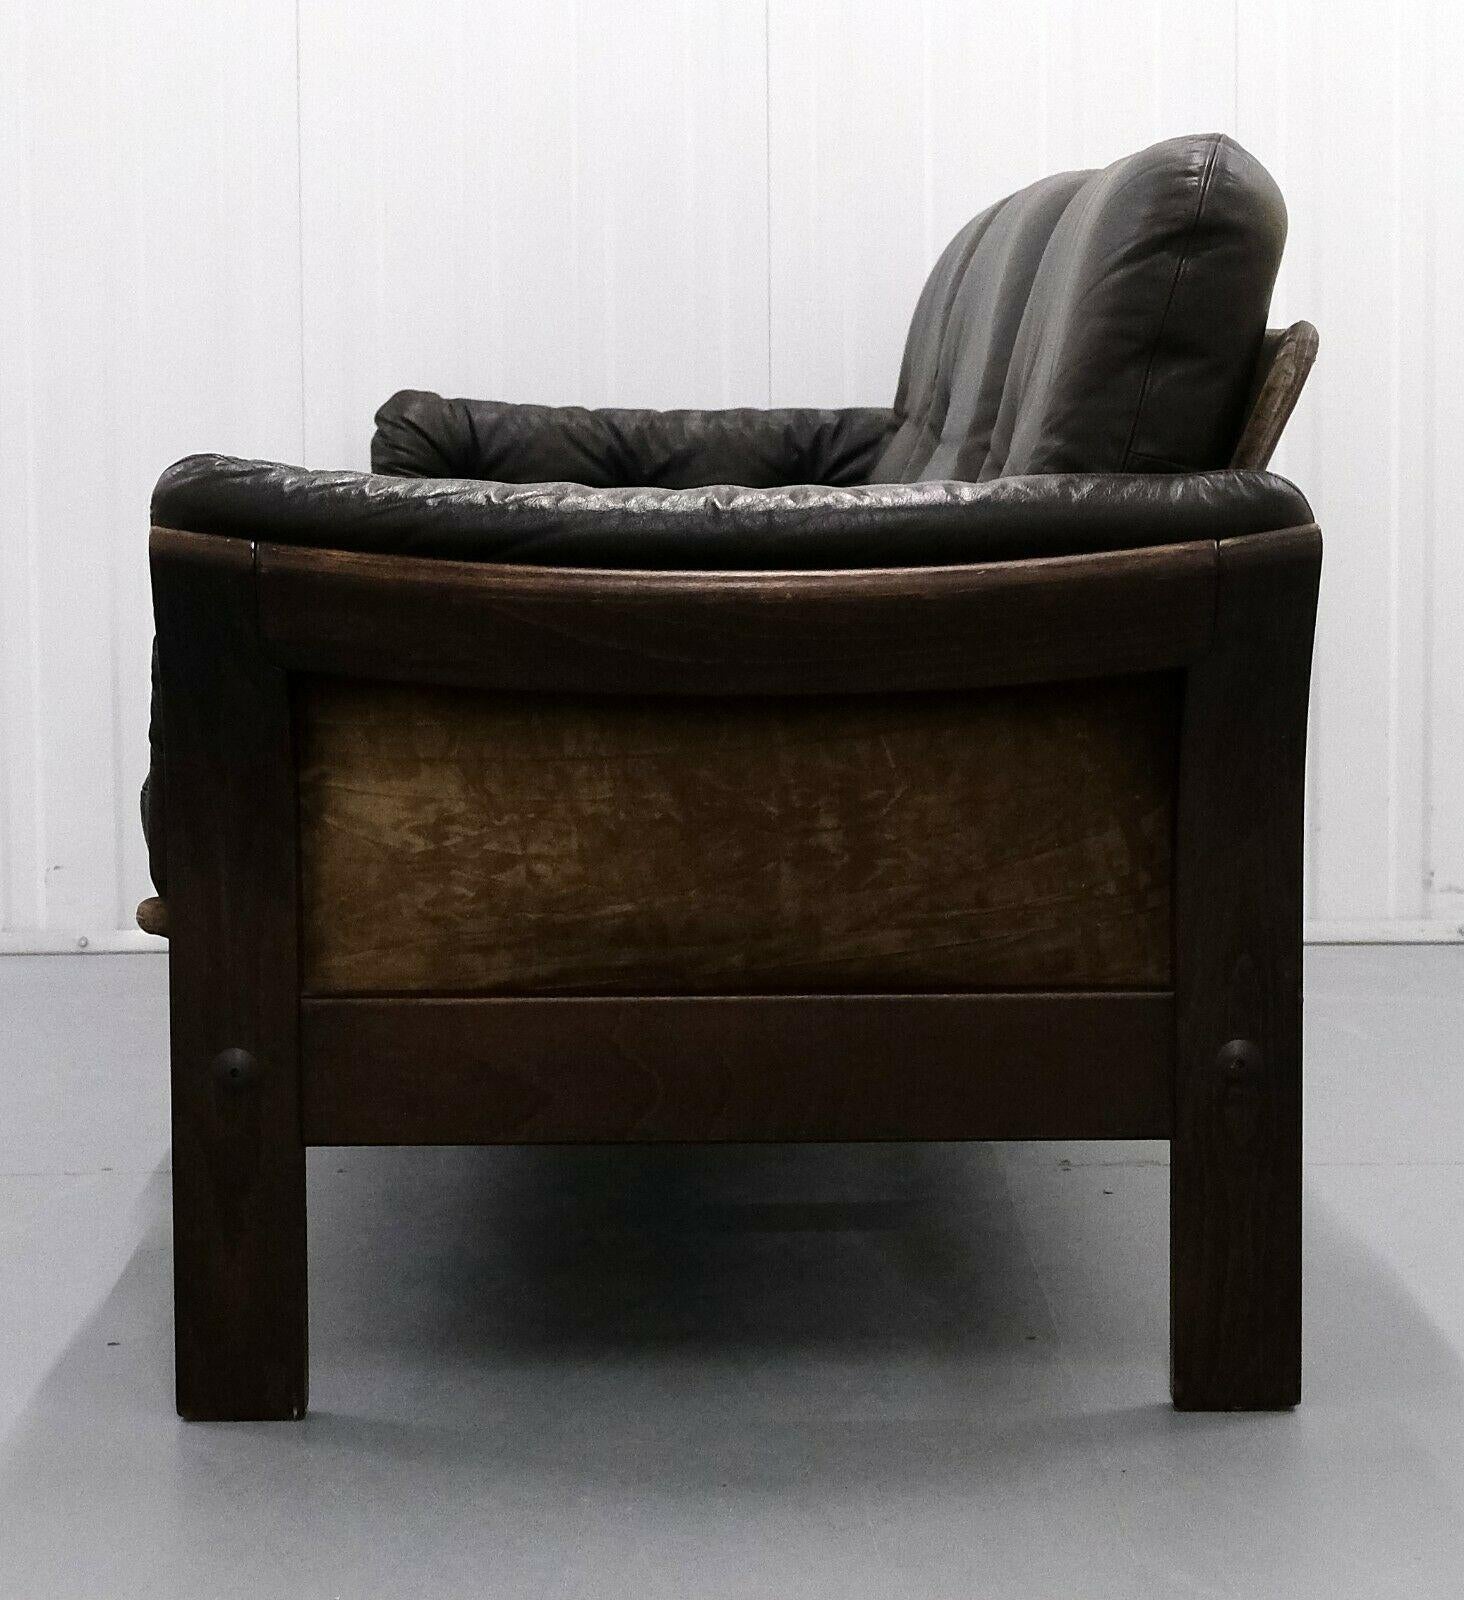 Hand-Crafted Stunning Thams Kvalitet Brown Leather & Suede Three Seater Sofa Bentwood Frame For Sale